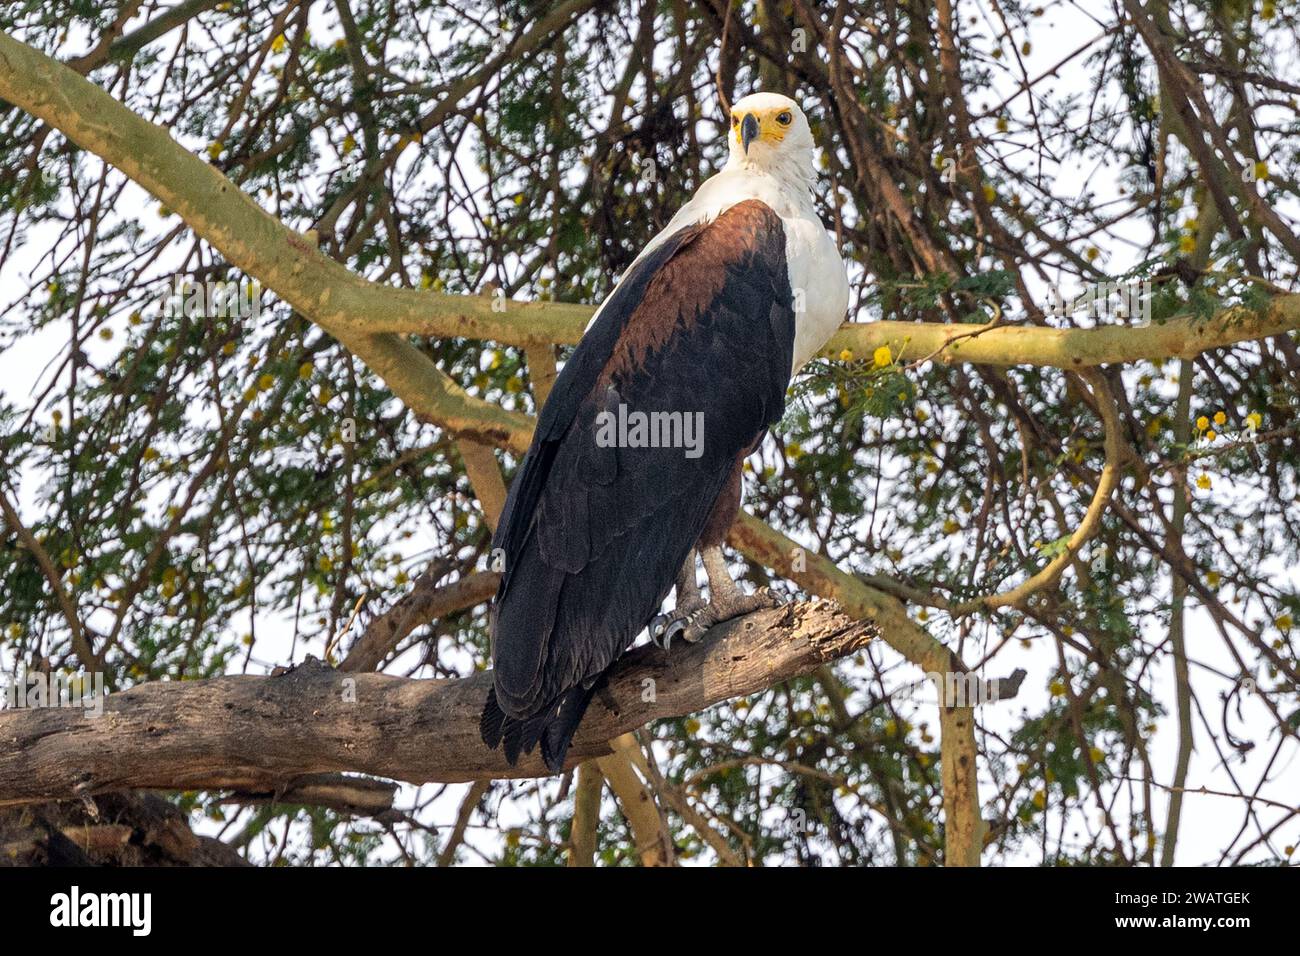 Afriican Fish Eagle, female, perched in a fever tree, Liwonde National Park, Malawi Stock Photo